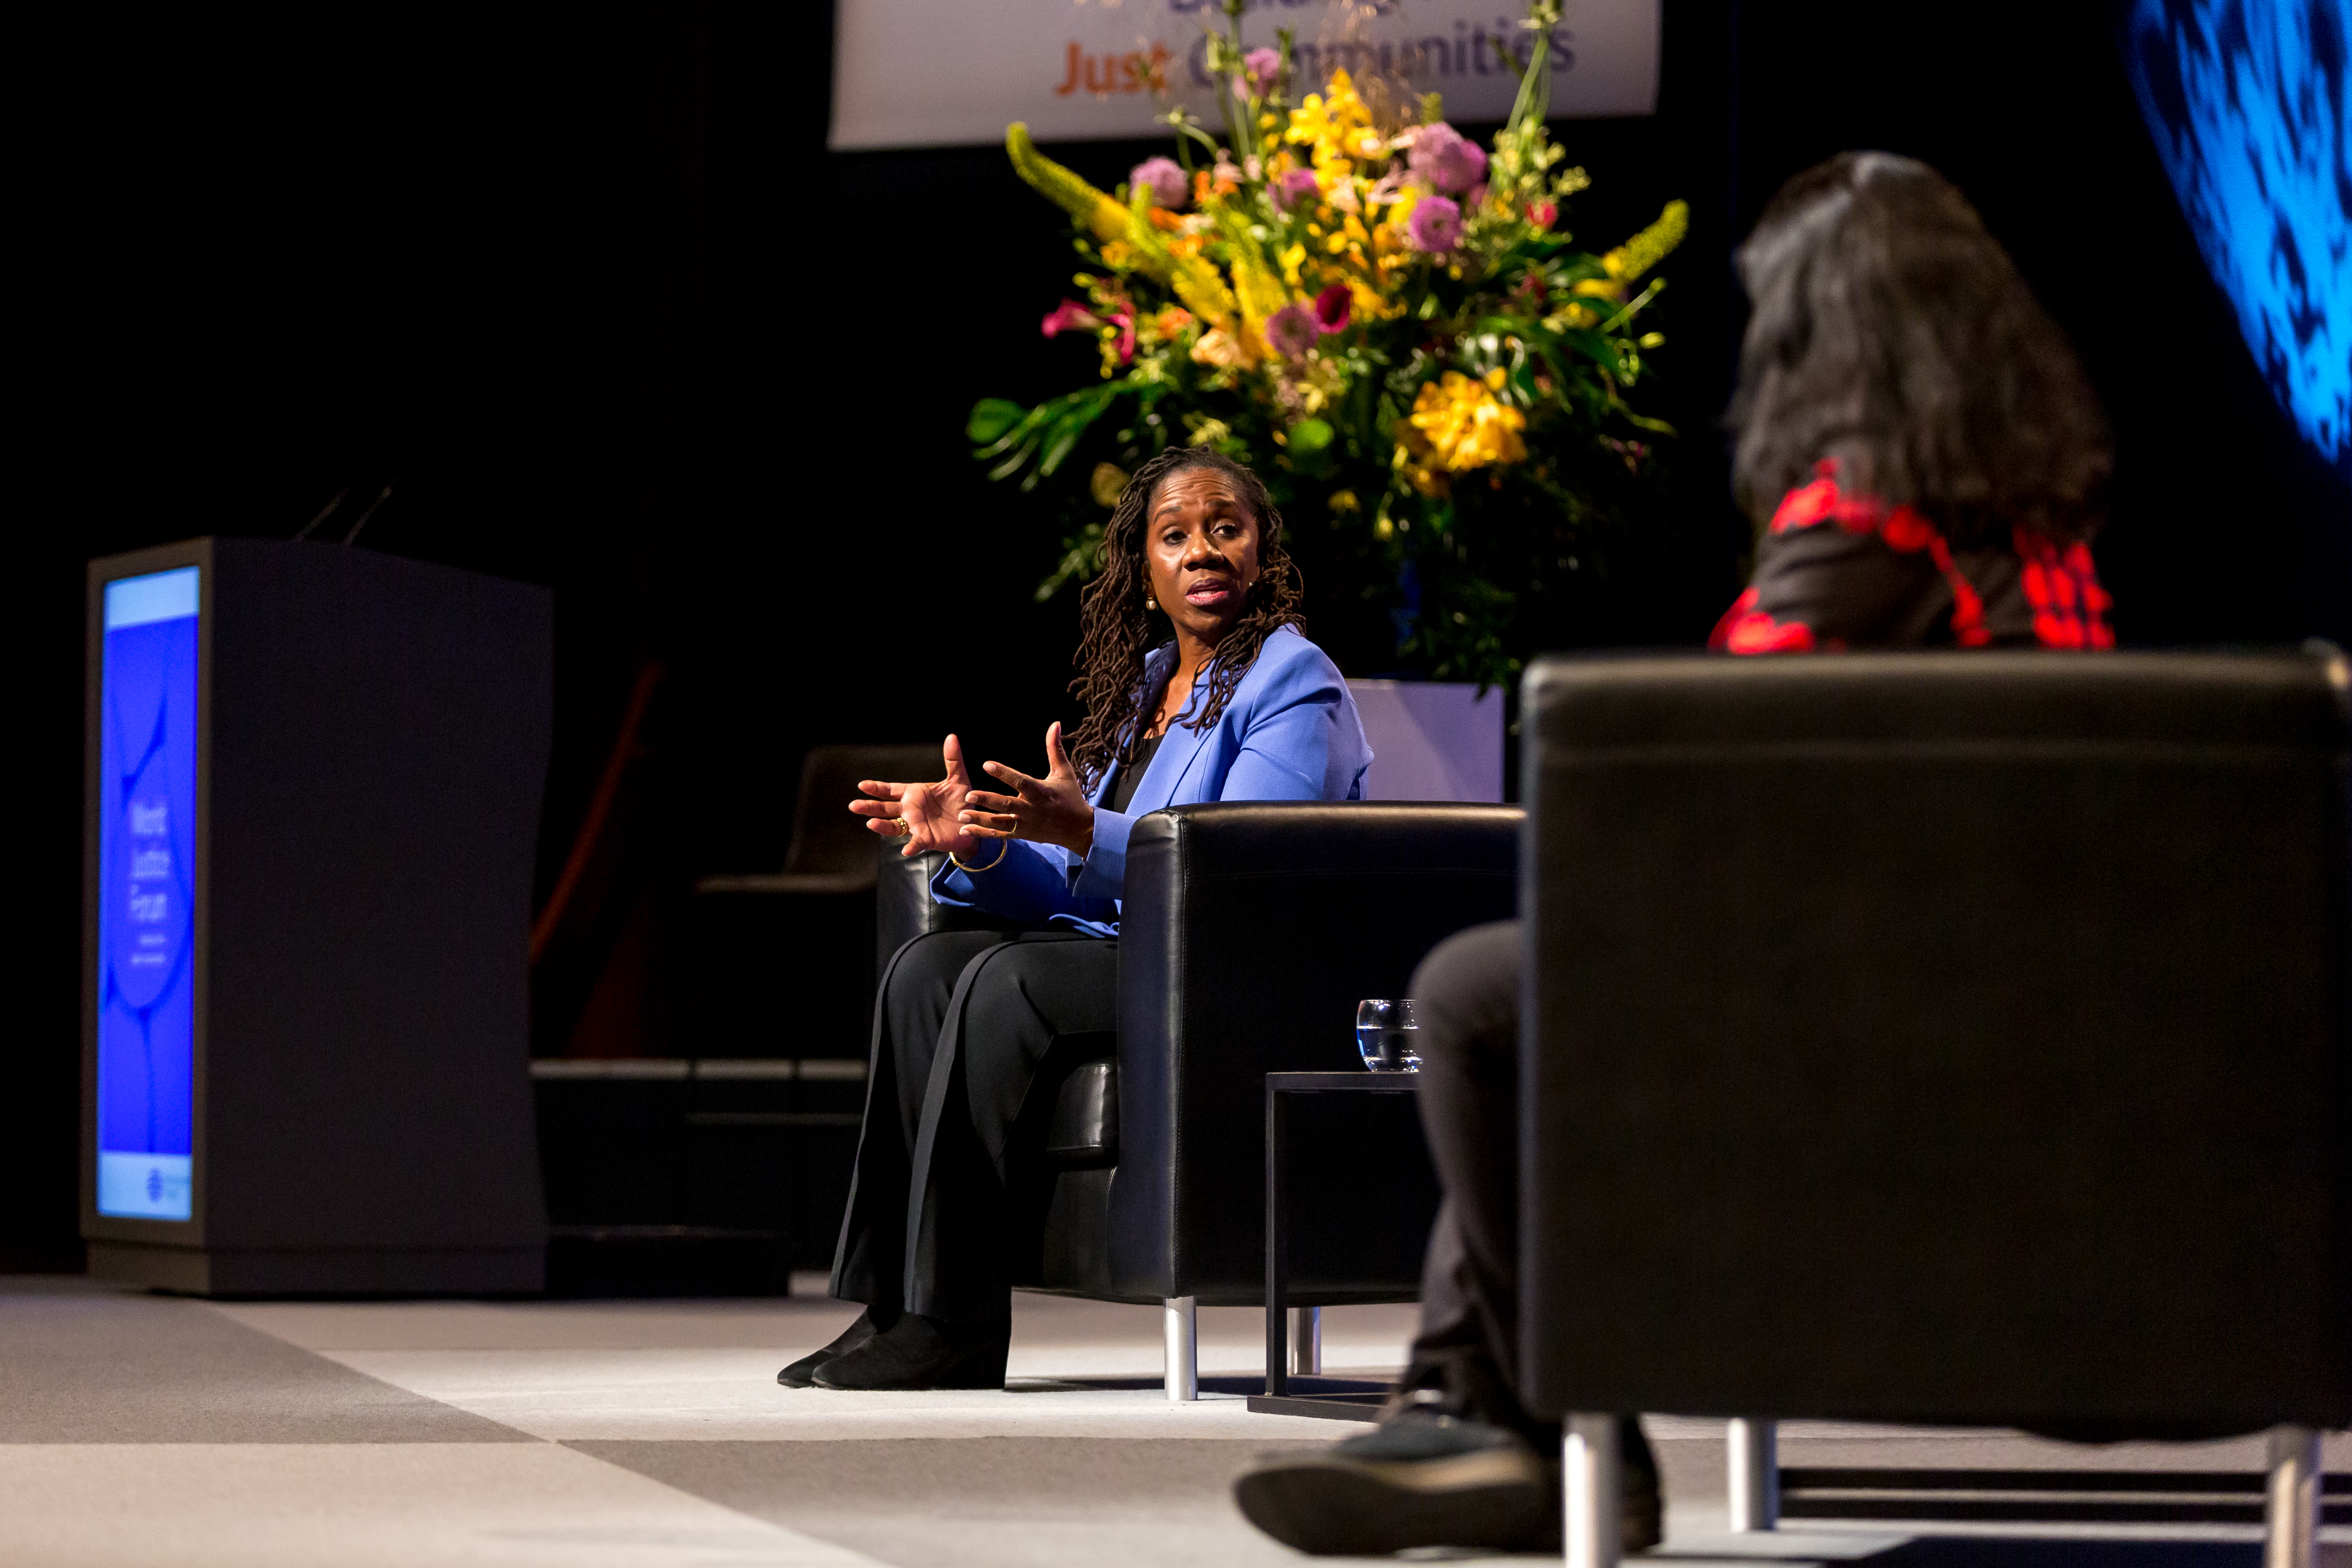 Sherrilyn Ifill, president and director-counsel emeritus of the NAACP Legal Defense Fund, speaks during the inaugural RBG Legacy Keynote conversation at the World Justice Forum 2022.